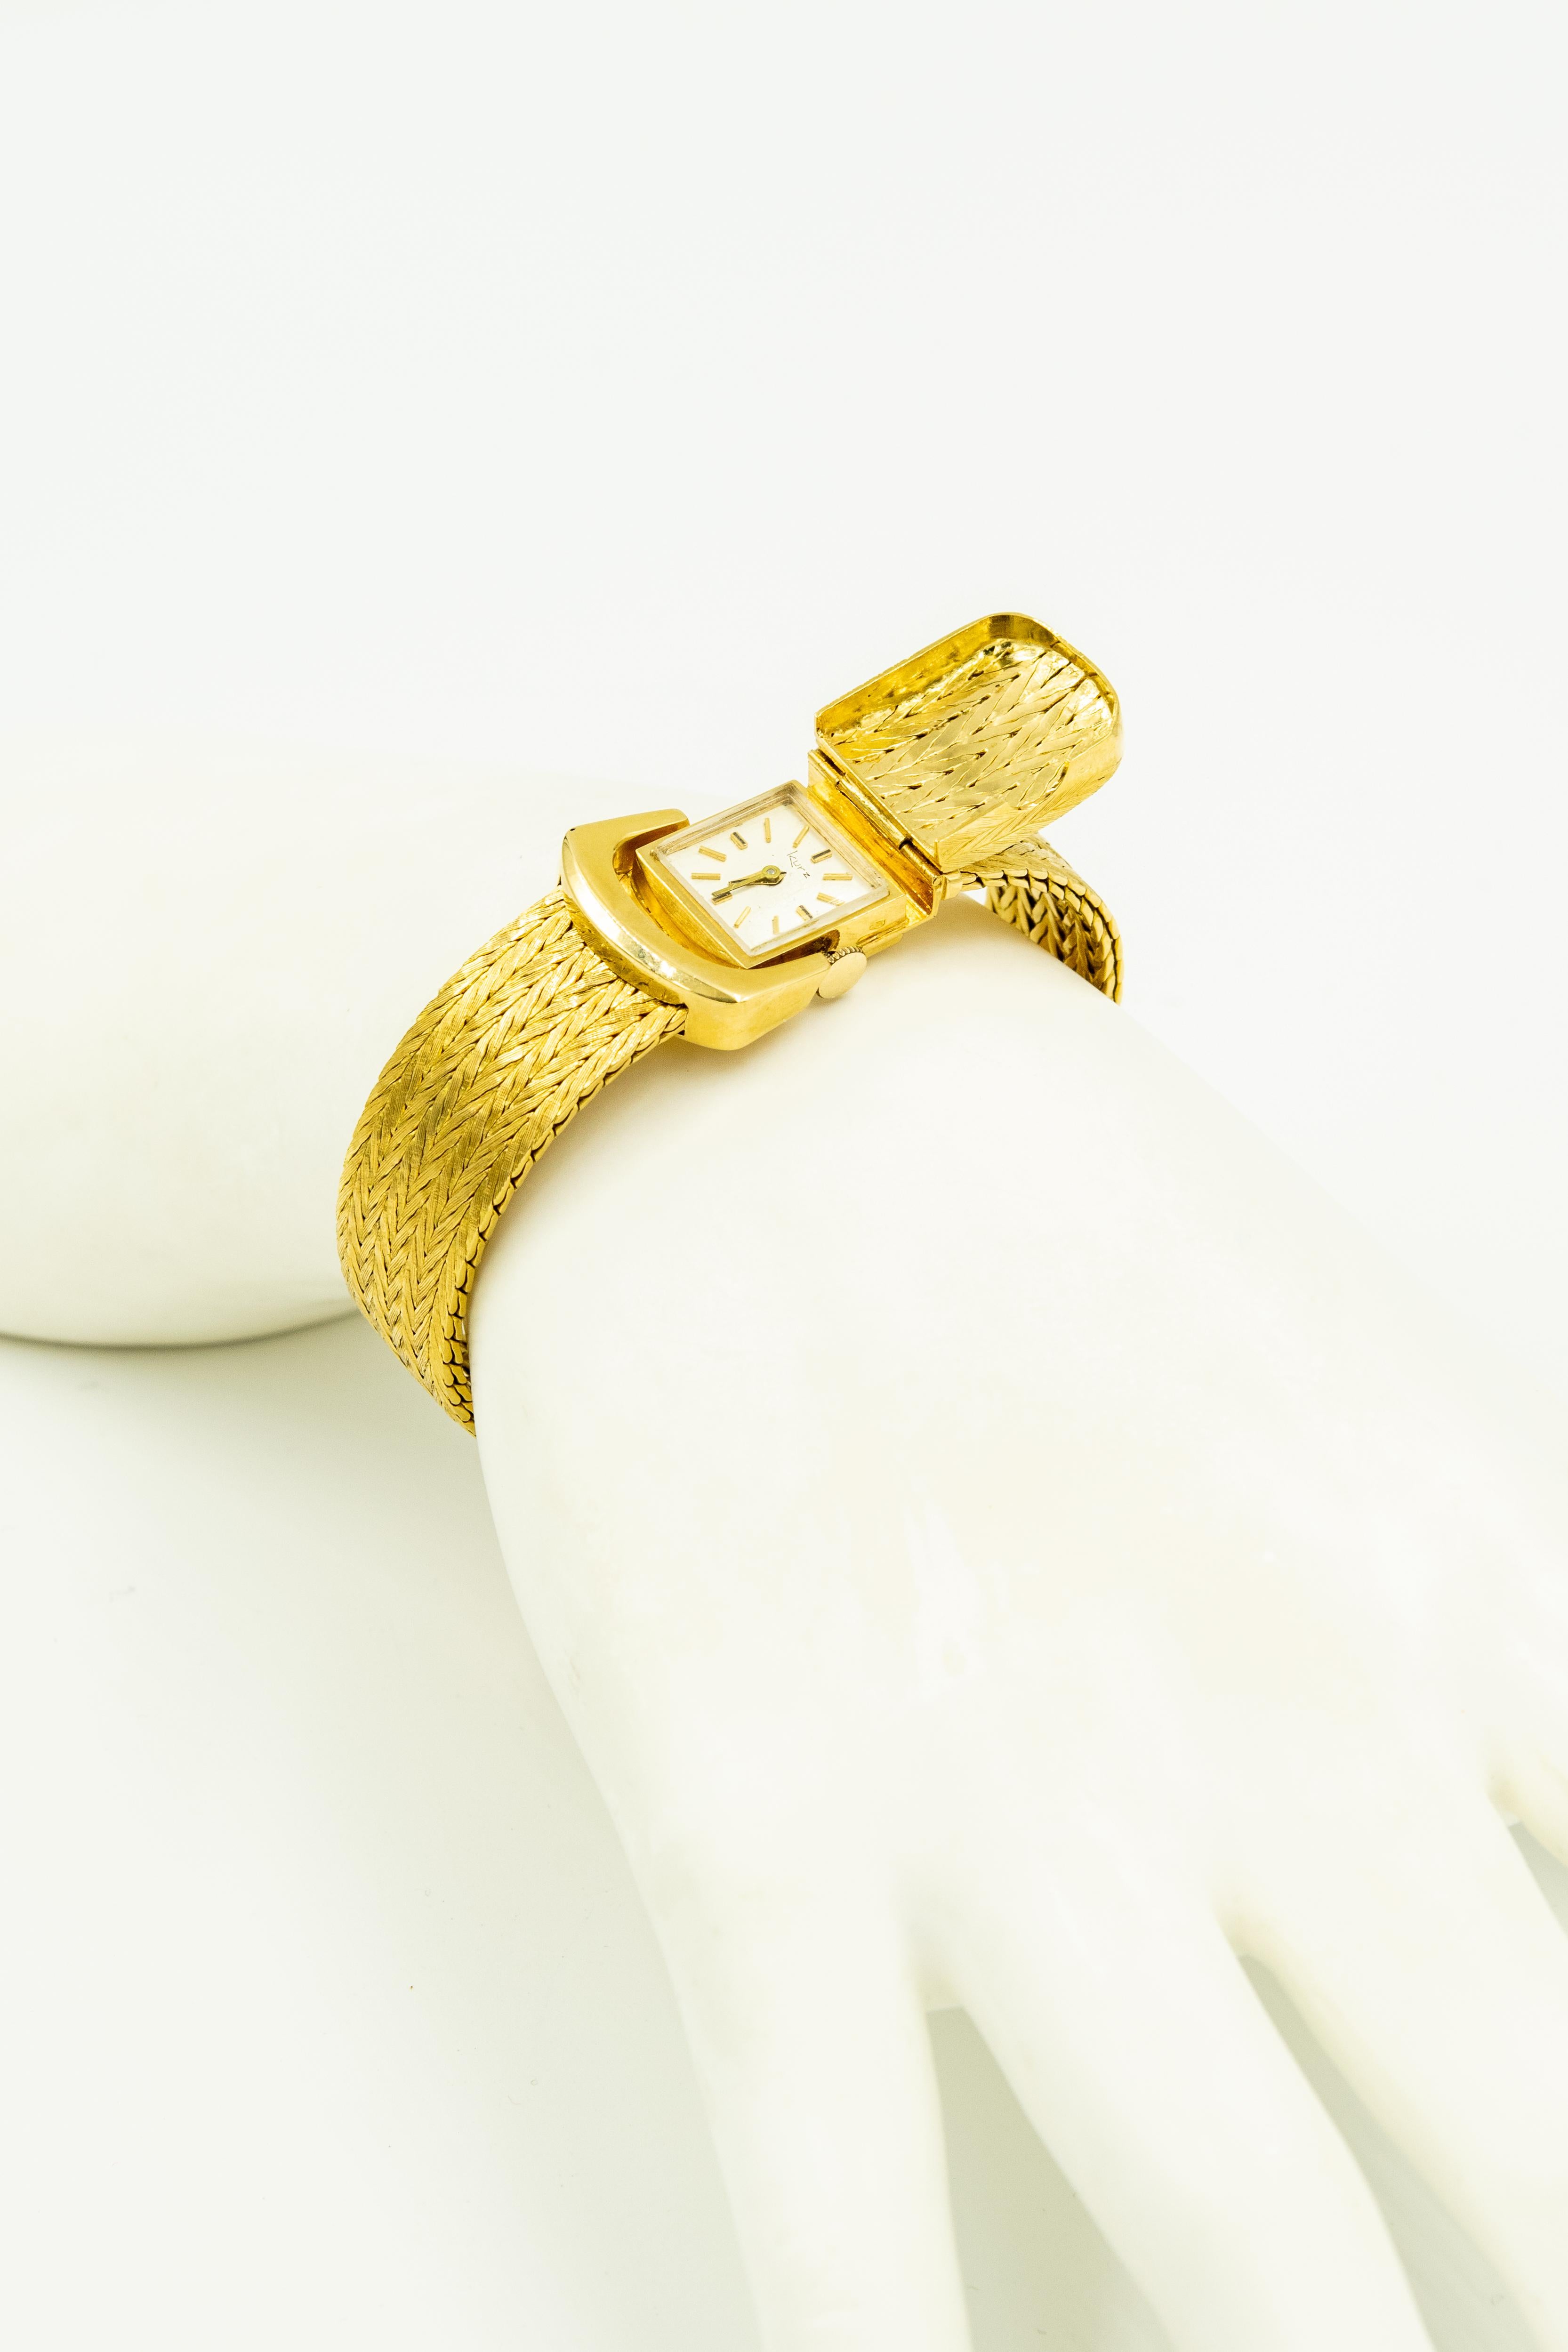 Kurz Mid-20th Century Covered Yellow Gold Buckle Ladies Wristwatch Bracelet For Sale 3